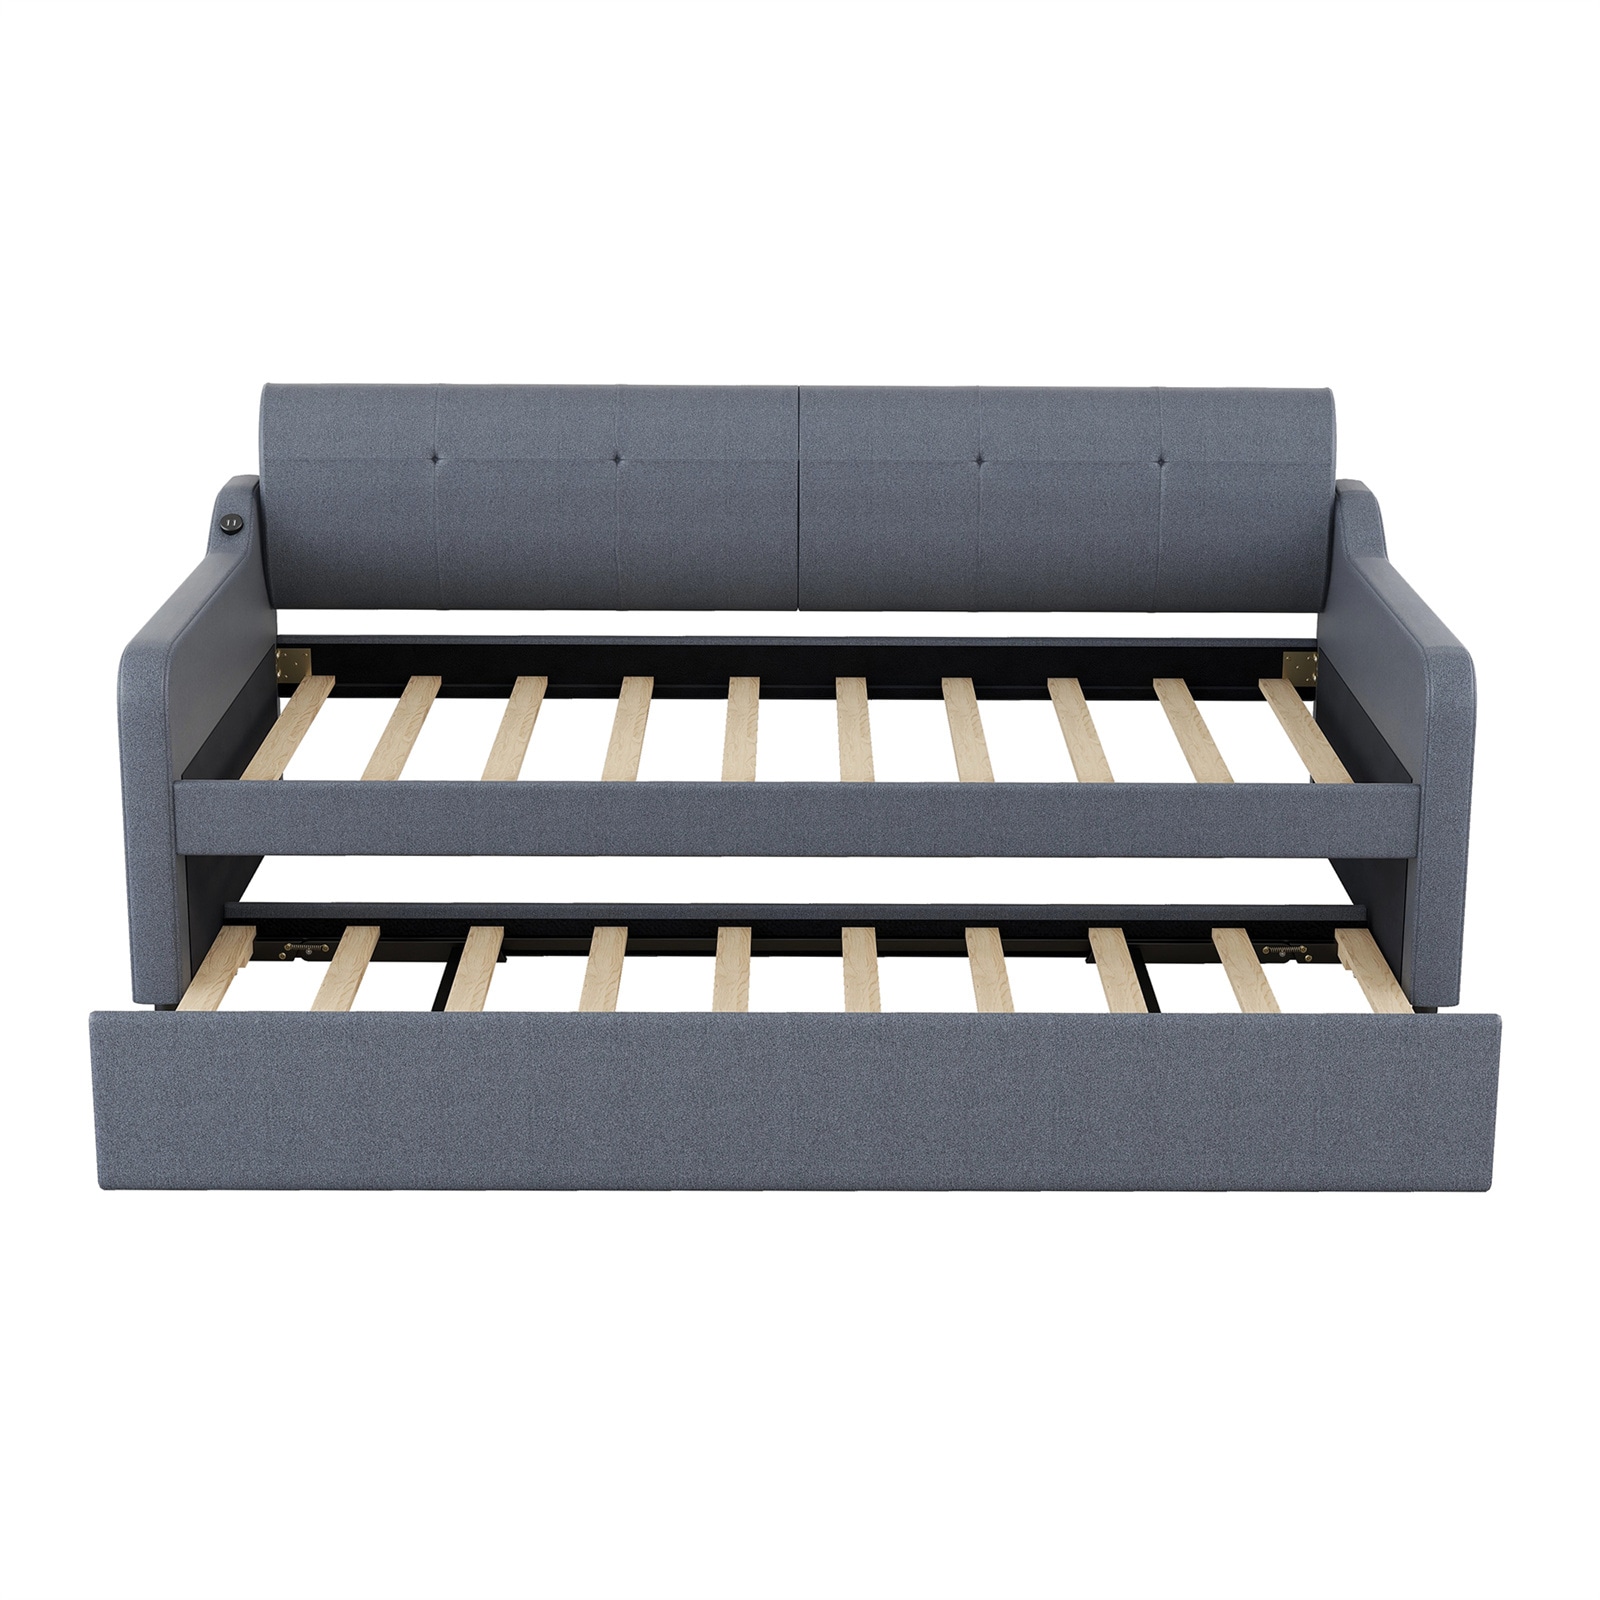 BESTCOSTY Gray Modern Sleeper Sofa Bed with Trundle and USB Charging ...